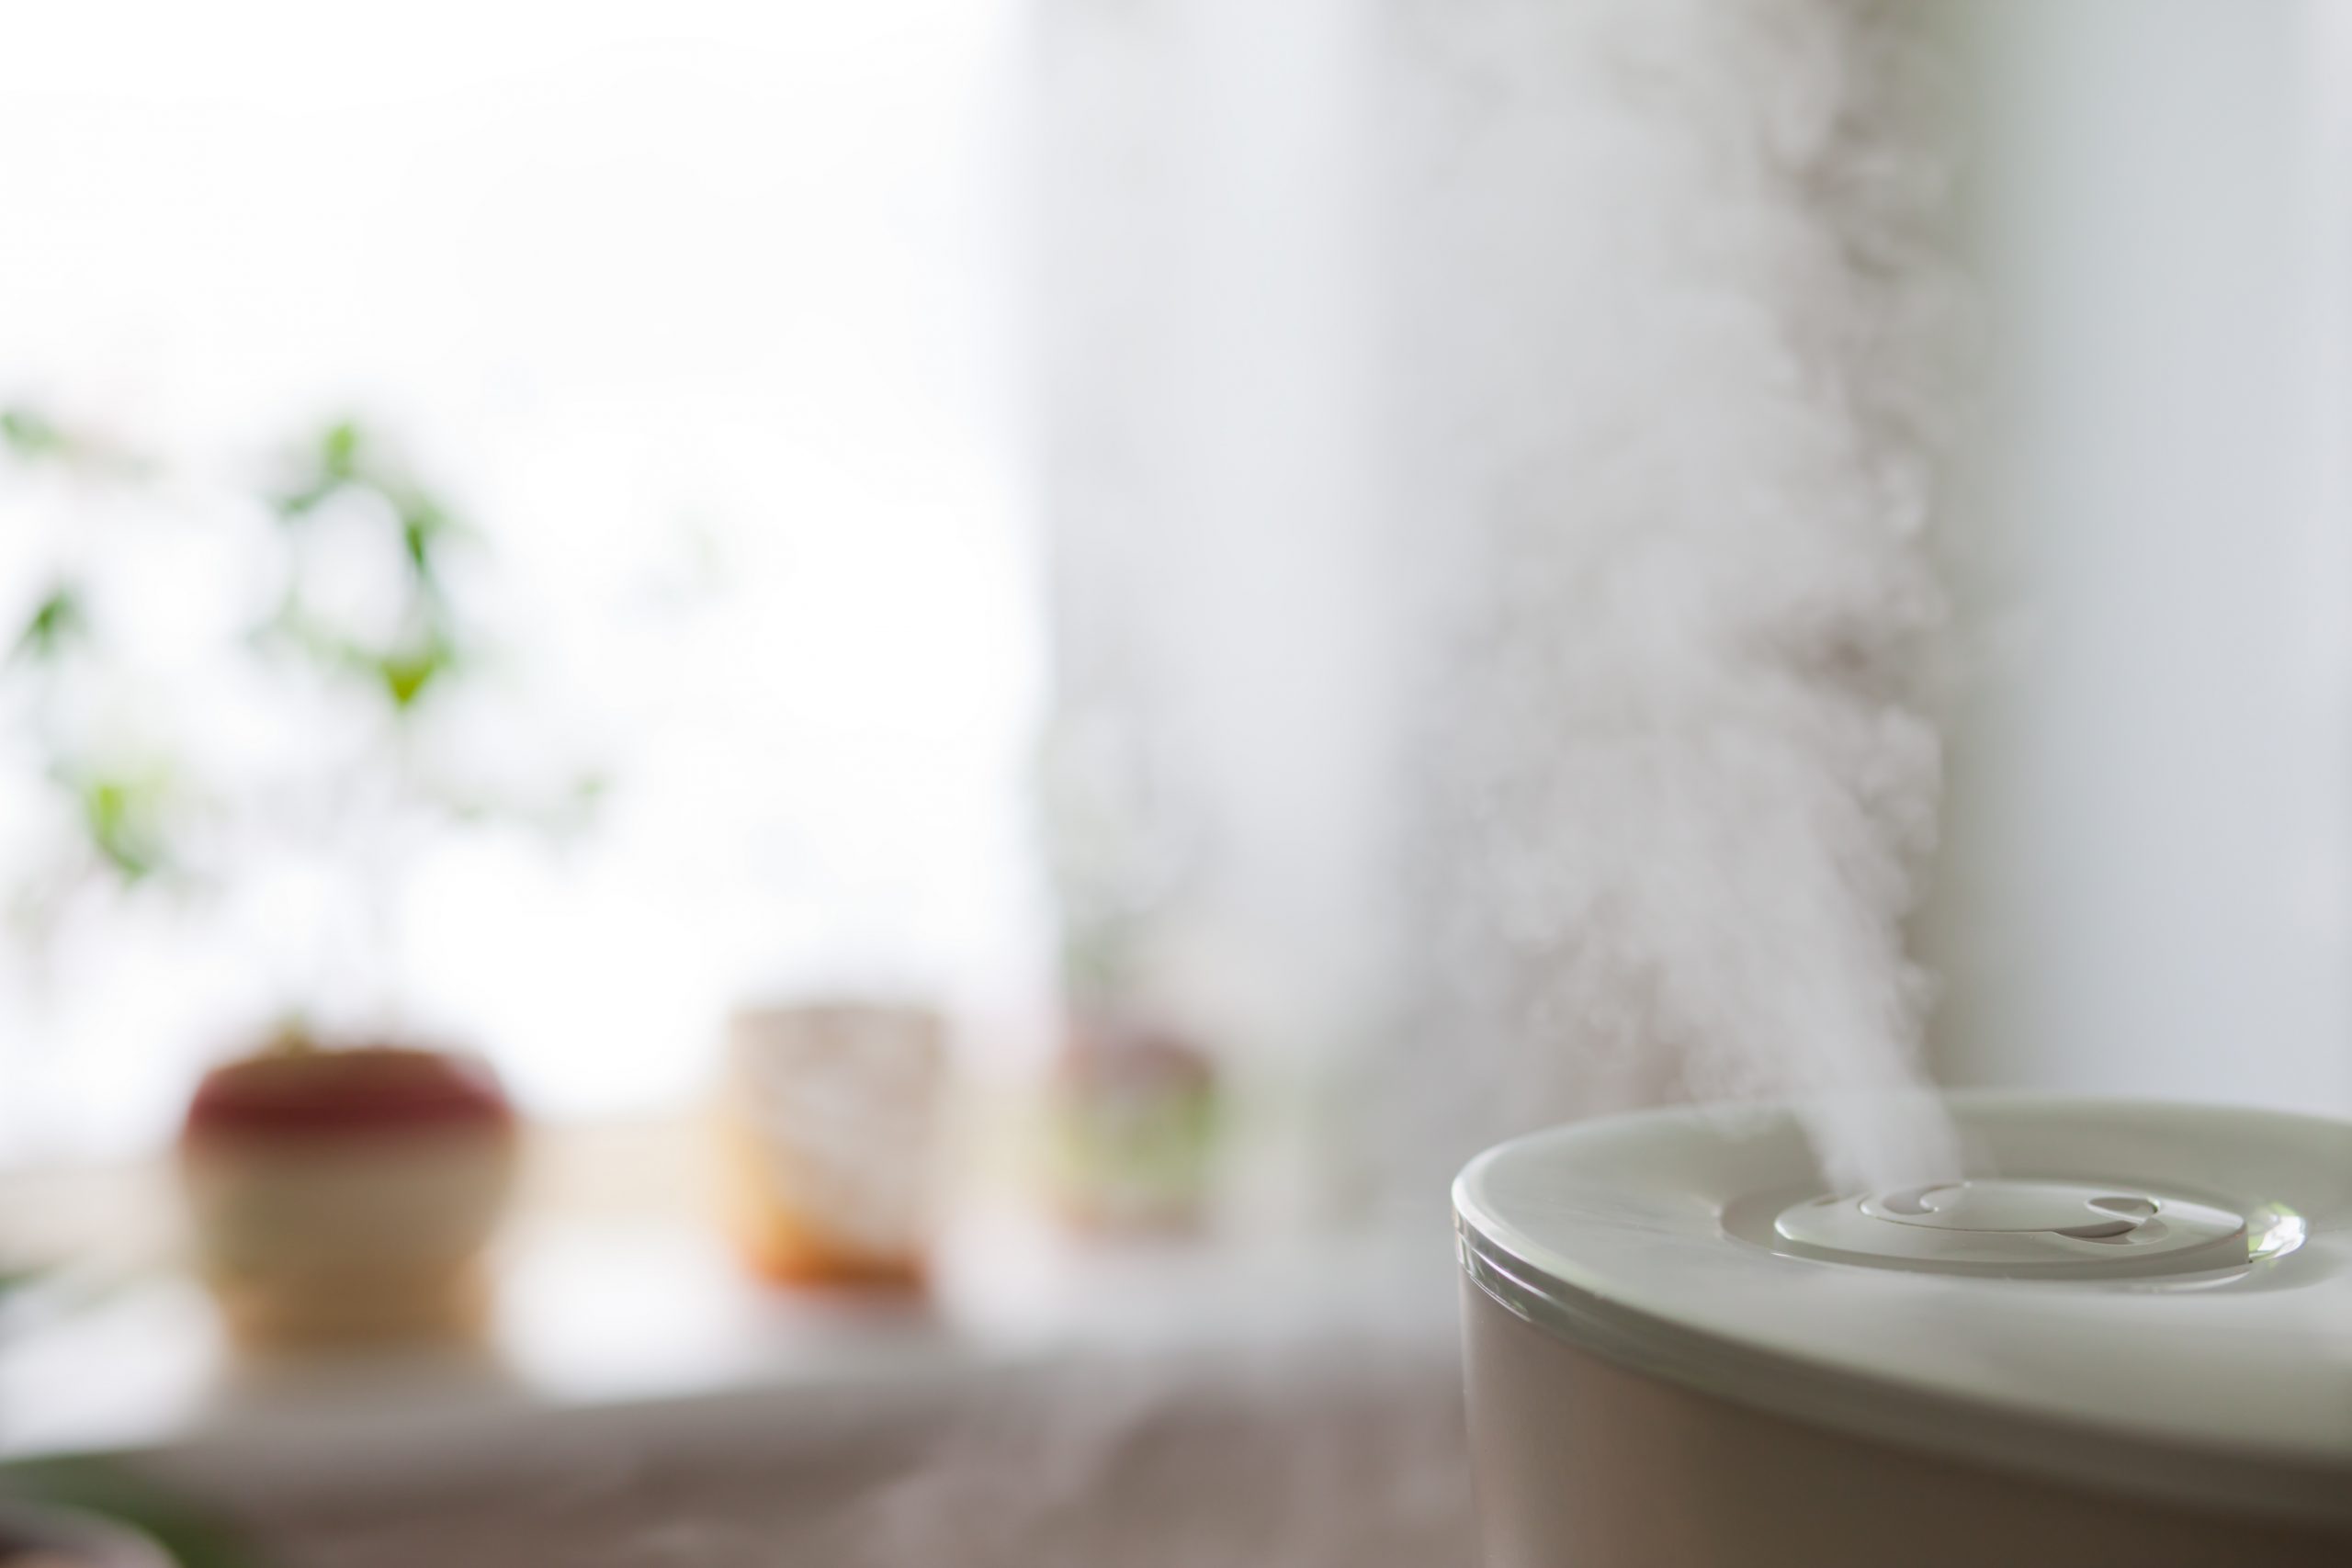 How Do I Know If My Home Needs a Humidifier to Control Humidity Levels?